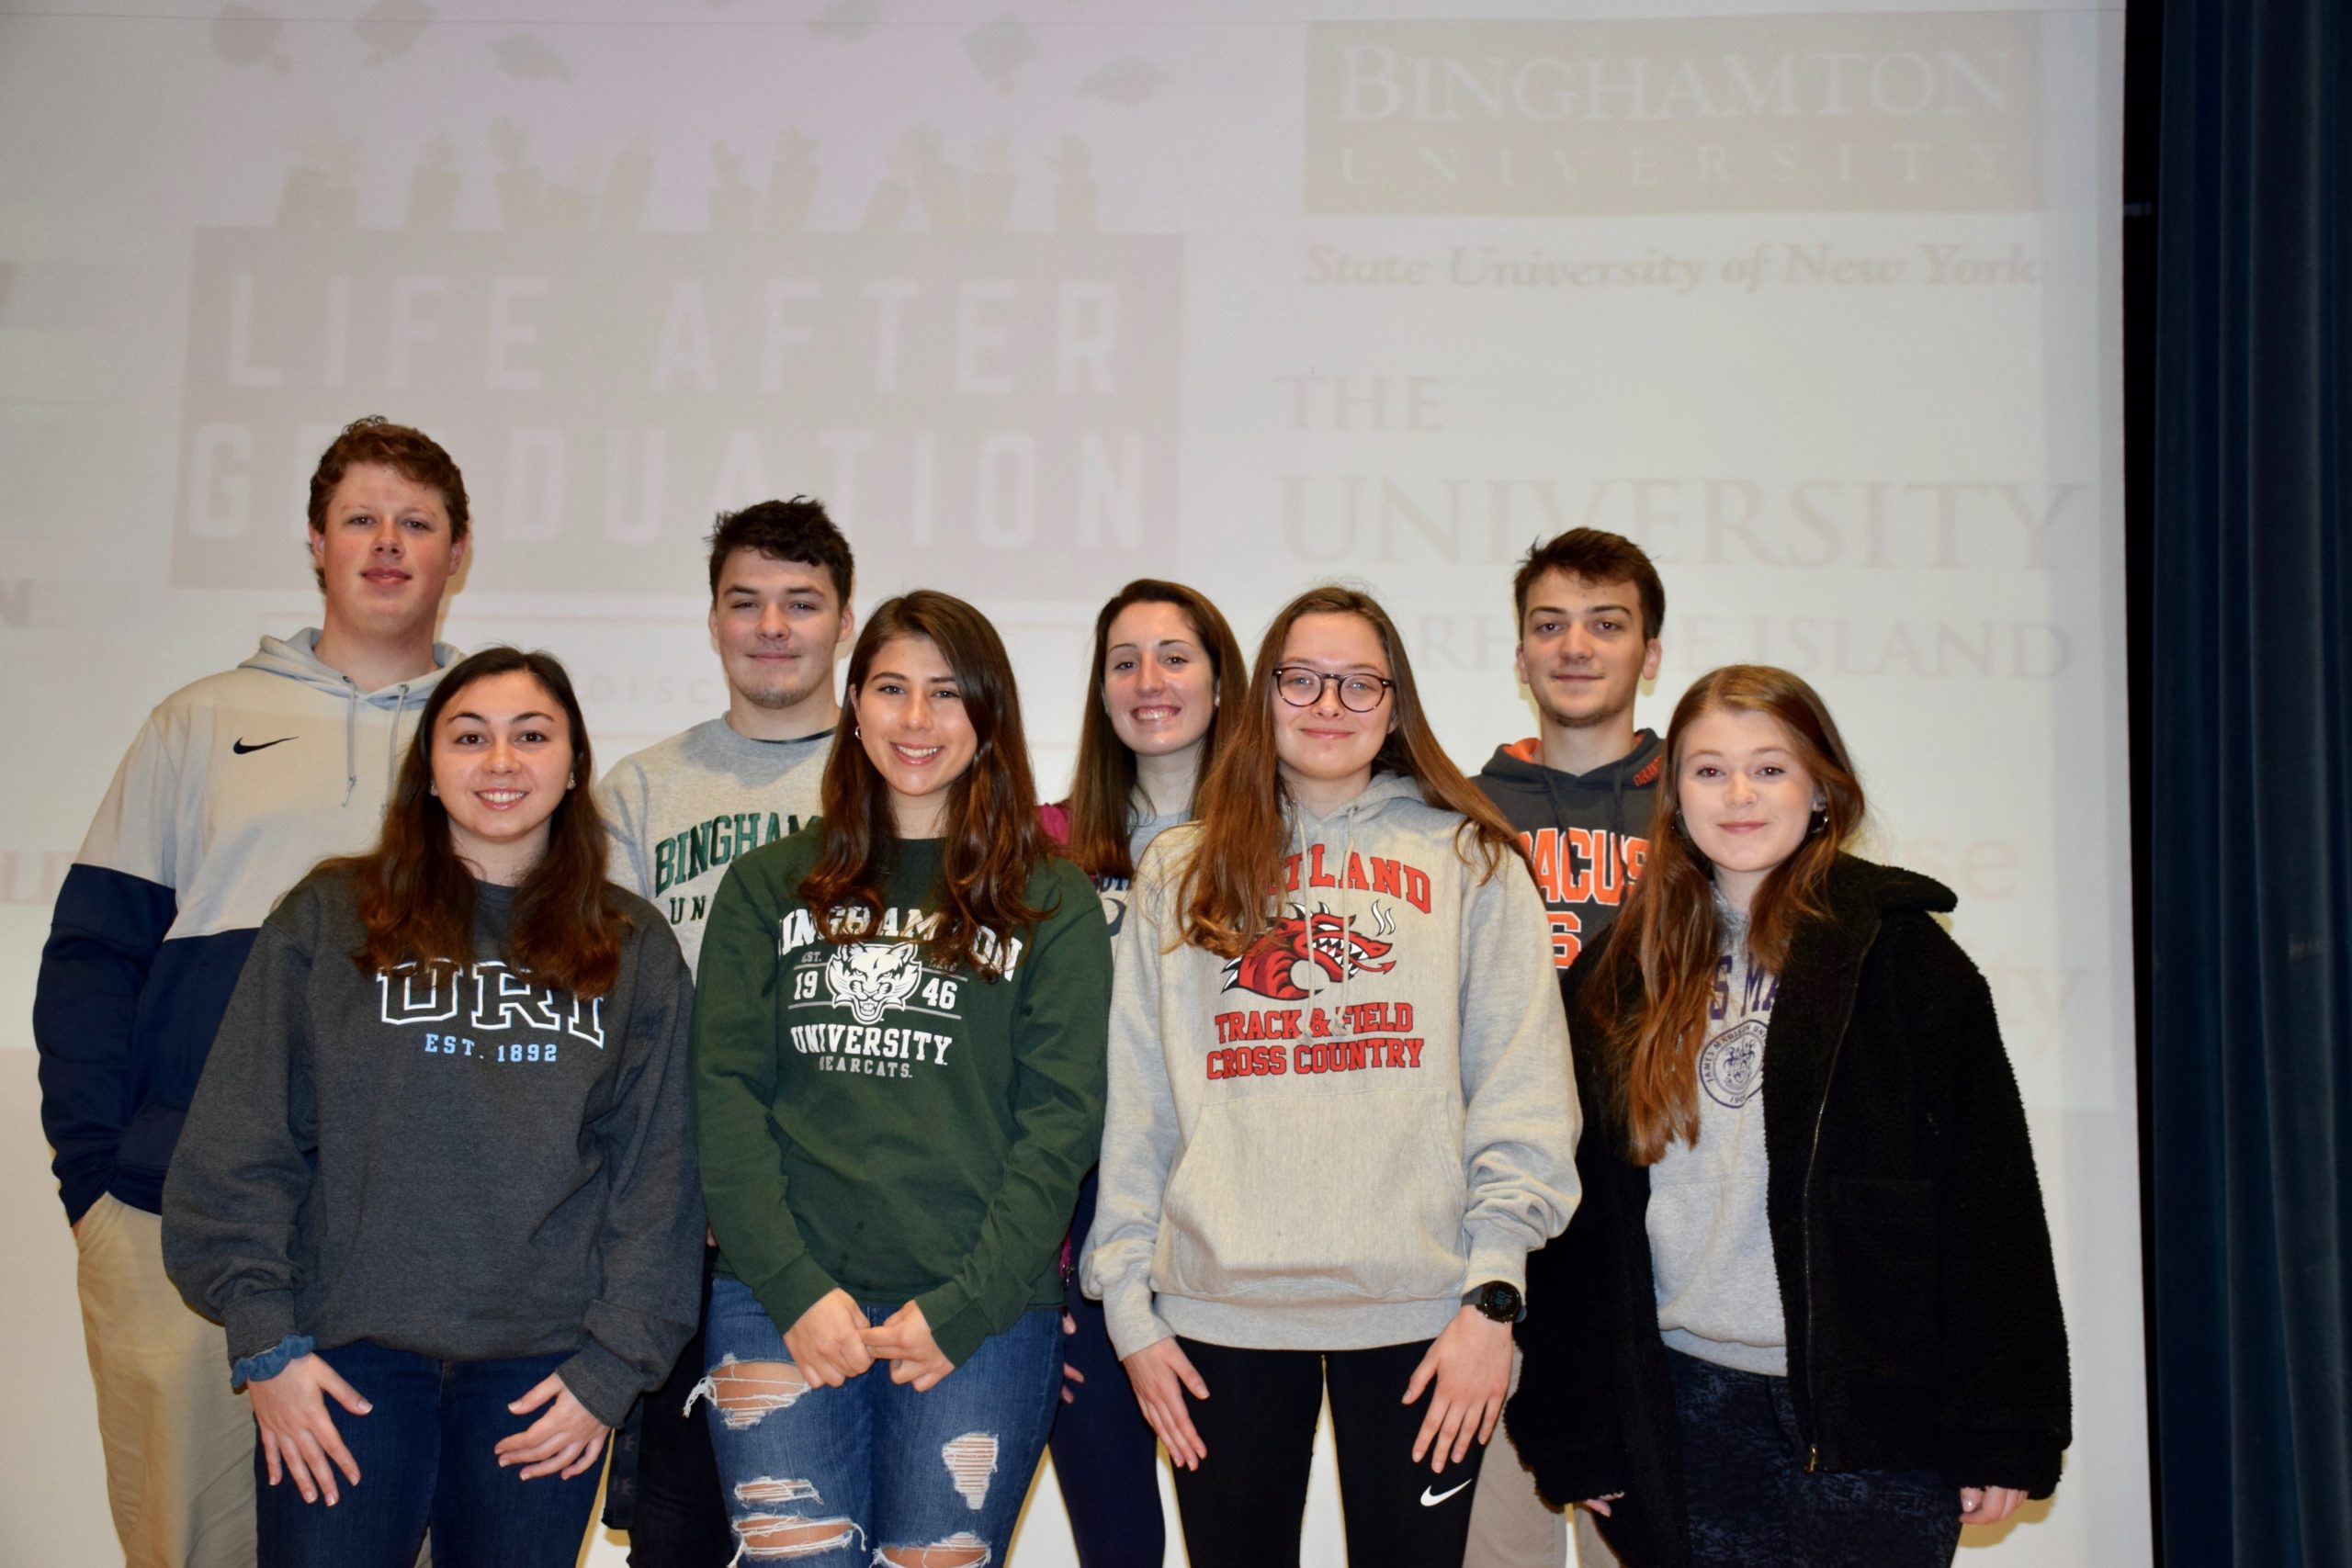 Eighth-graders at Hampton Bays Middle School learned about a variety of colleges from visiting Hampton Bays High School alumni during the middle school’s 12th annual College Awareness Day. Back row, left to right, Sean Noonan (Penn State University), Thomas O’Connell (Binghamton University), Bridget Hughes (University of South Carolina) and Jared Strecker (Syracuse University), front, Sarah Fassino (University of Rhode Island), Christina Coulton (Binghamton University) Maryrose O’Connell (SUNY Cortland), and Meghan Long (James Madison University).